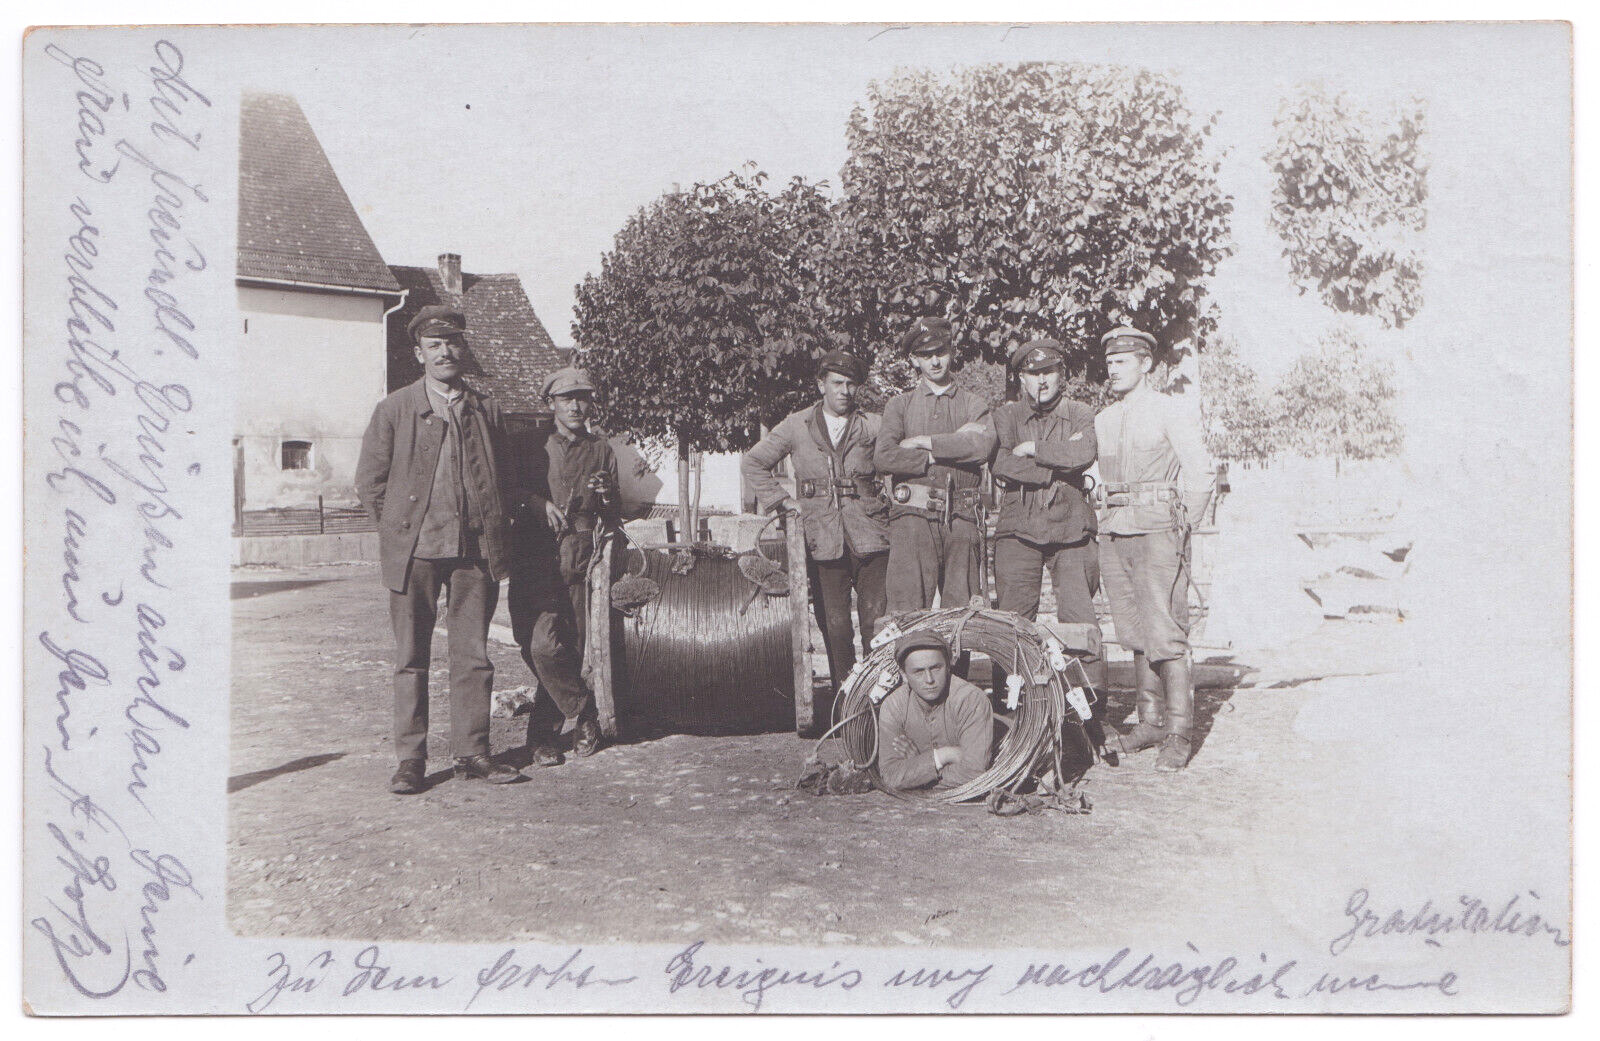 German Lineman Crew Occupation Electrical Cable Reel Coil c. 1922  RPPC Postcard